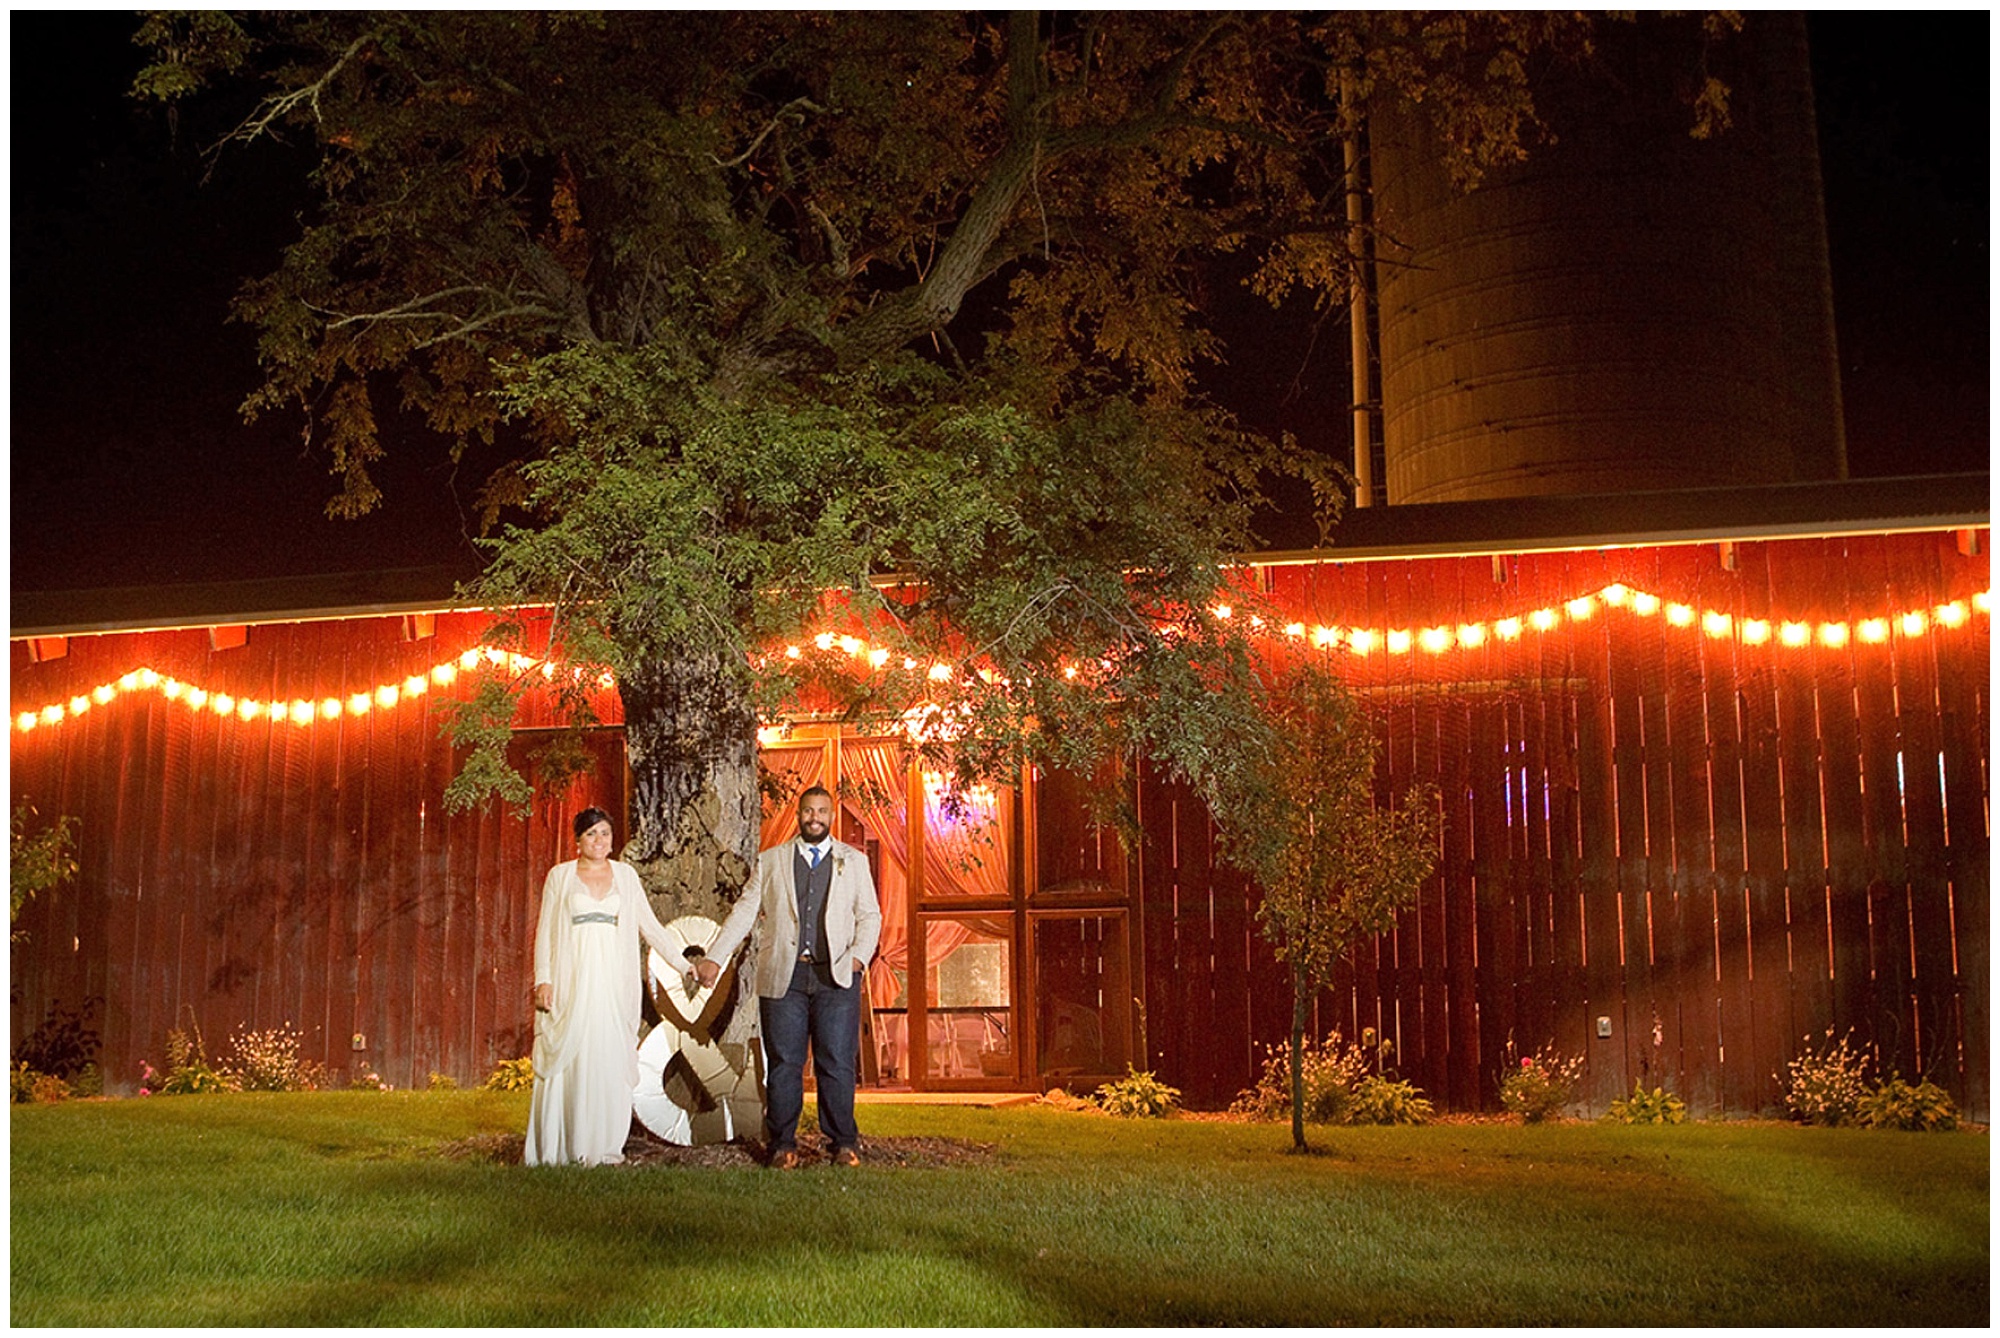 Bride and groom in this night photo outside the reception barn.